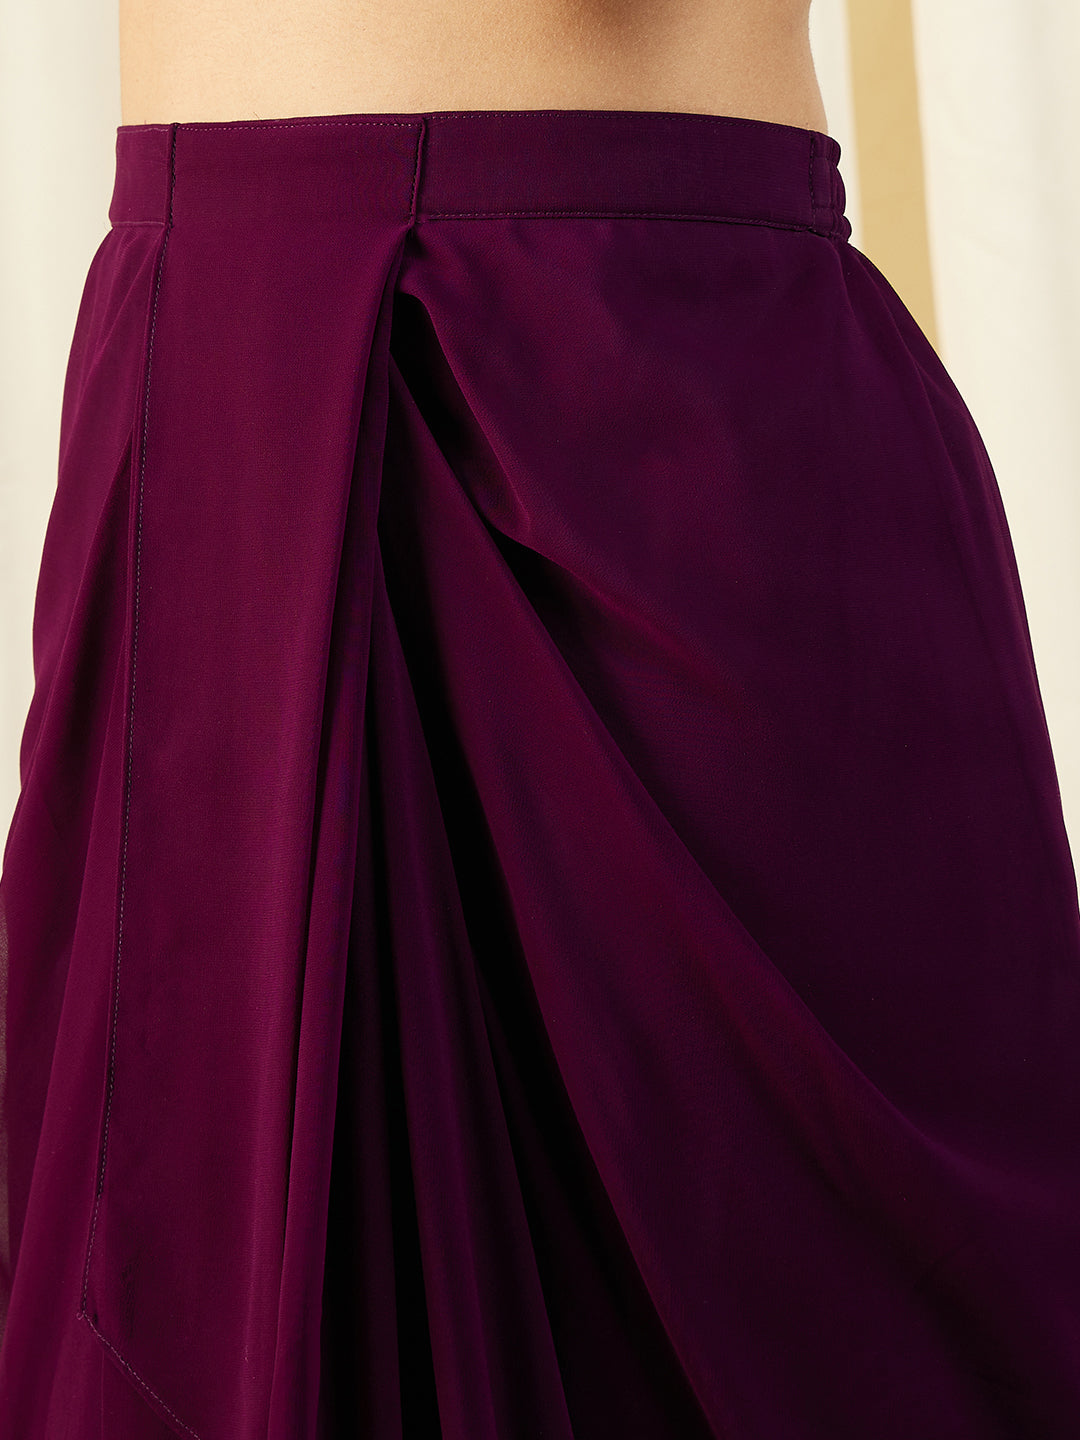 Cape Top with Draped Skirt in Purple Color